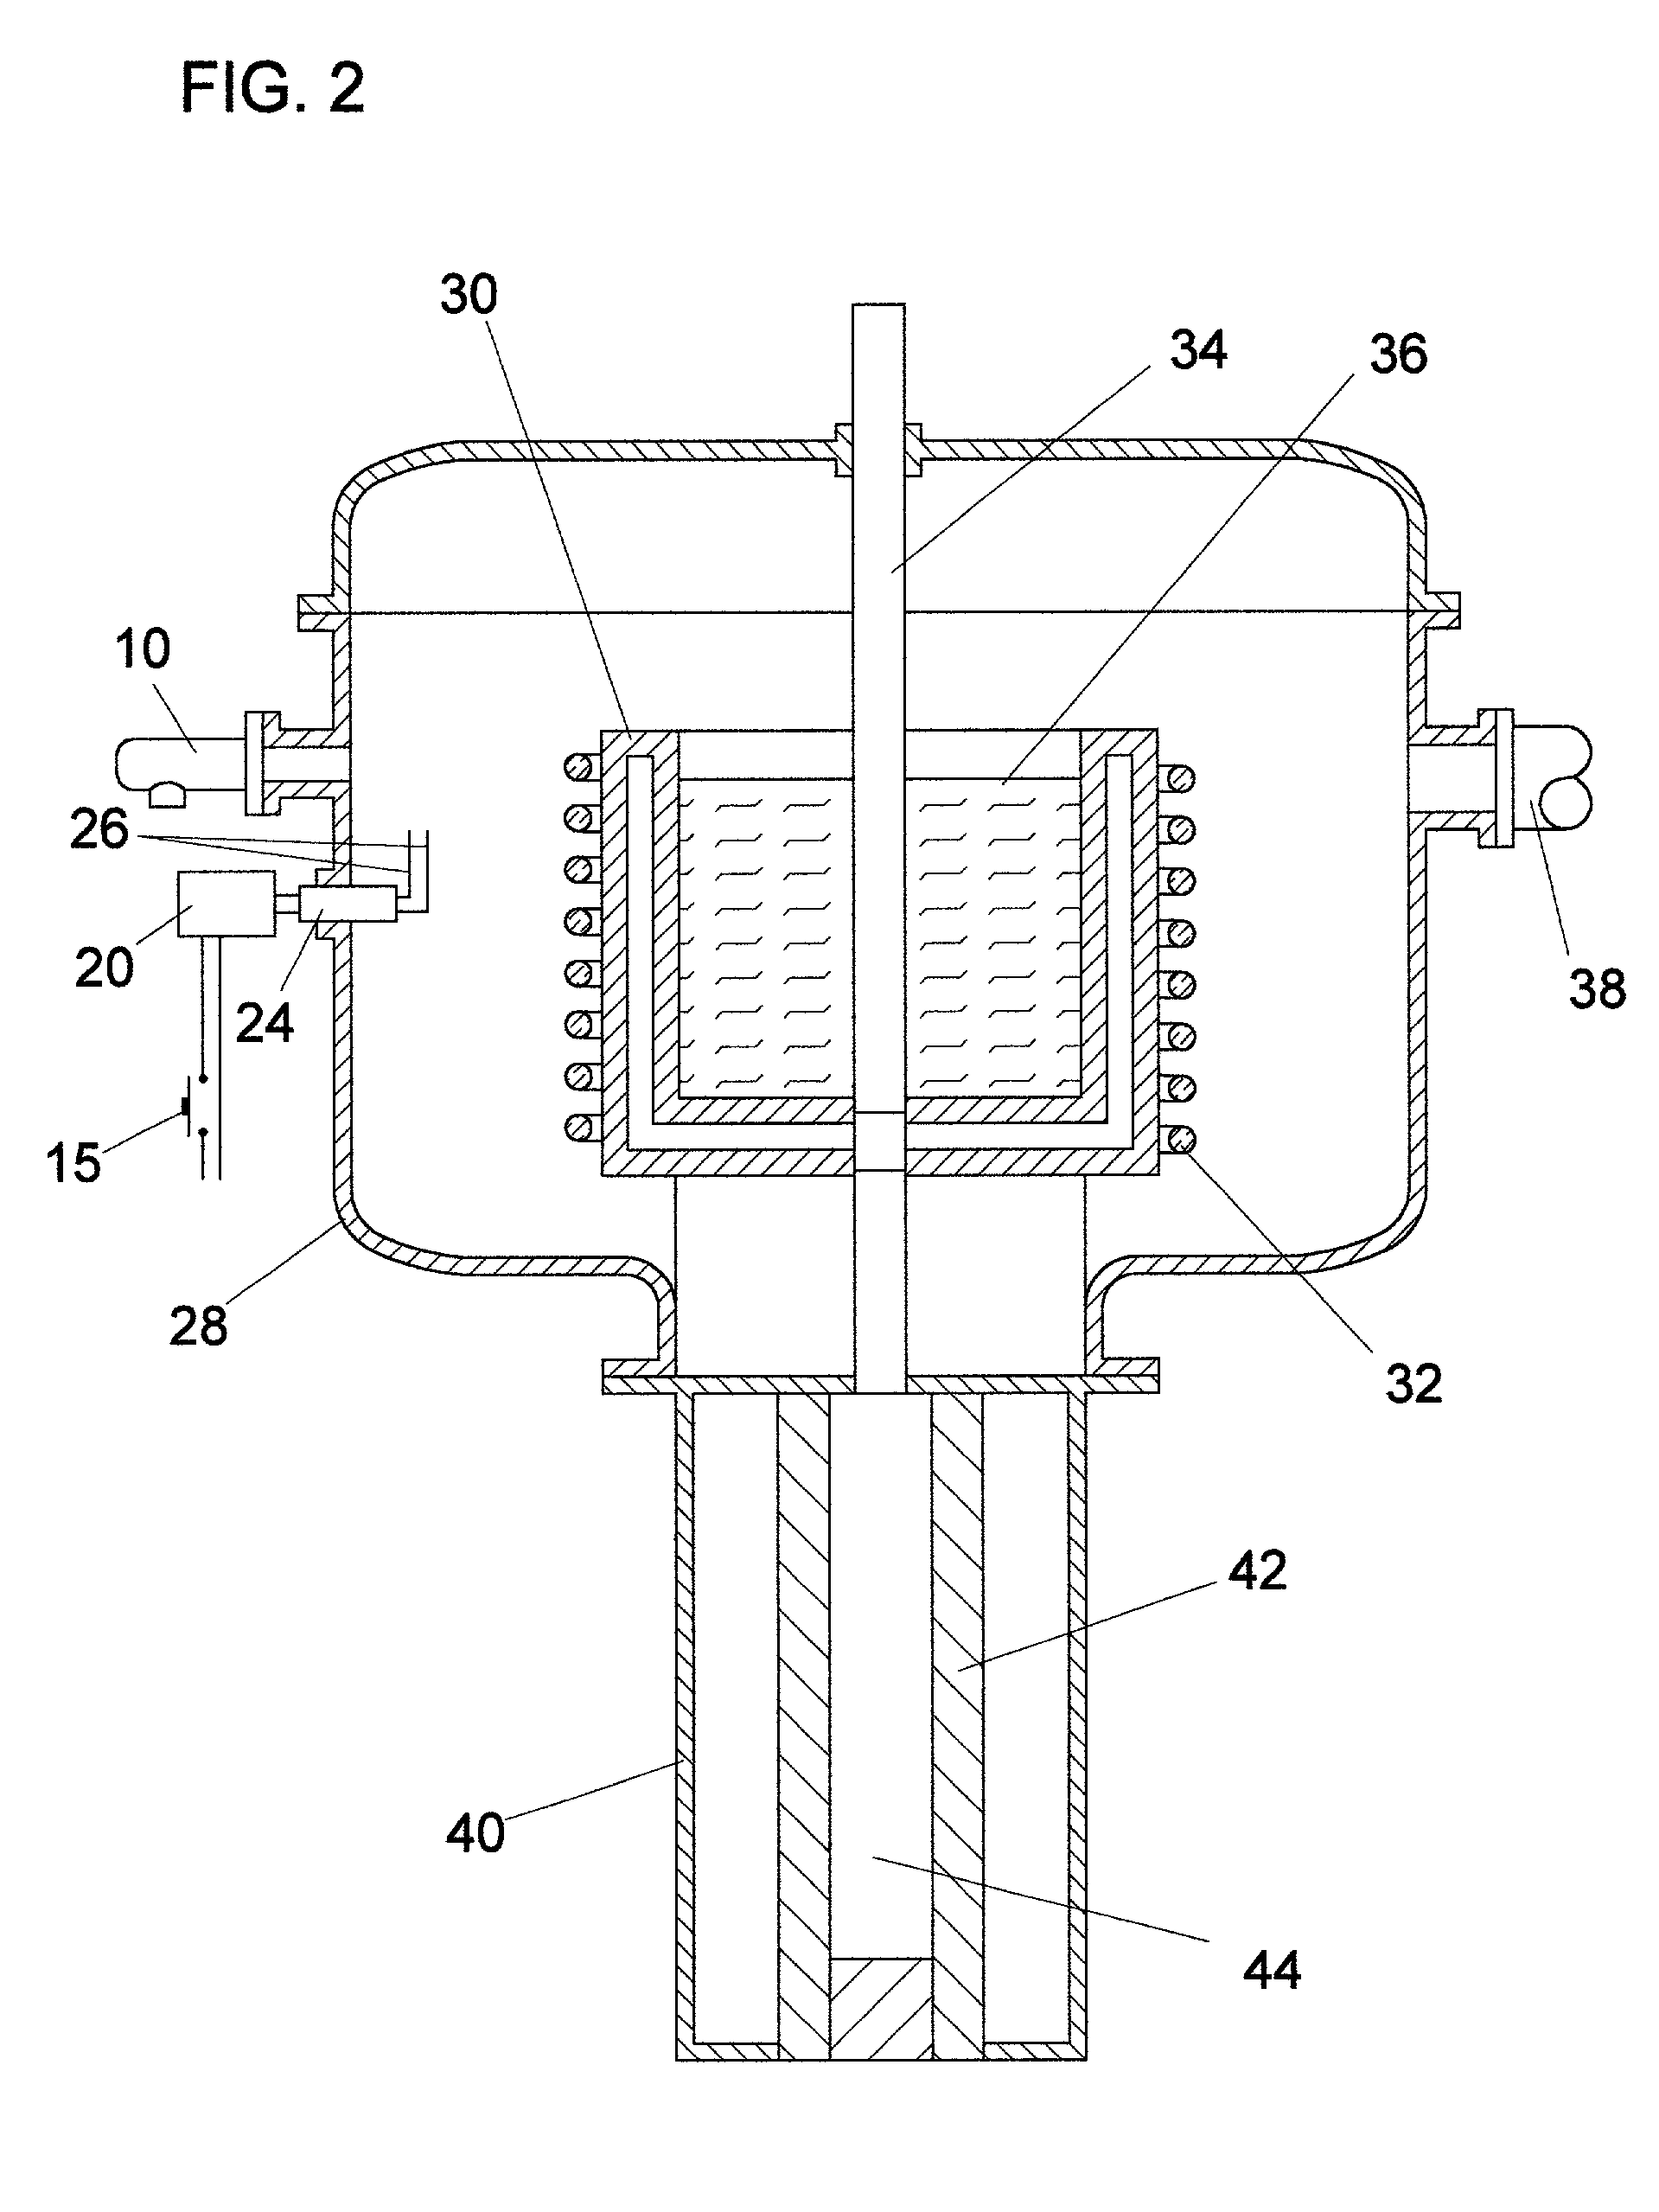 Device and method to mitigate hydrogen explosions in vacuum furnaces